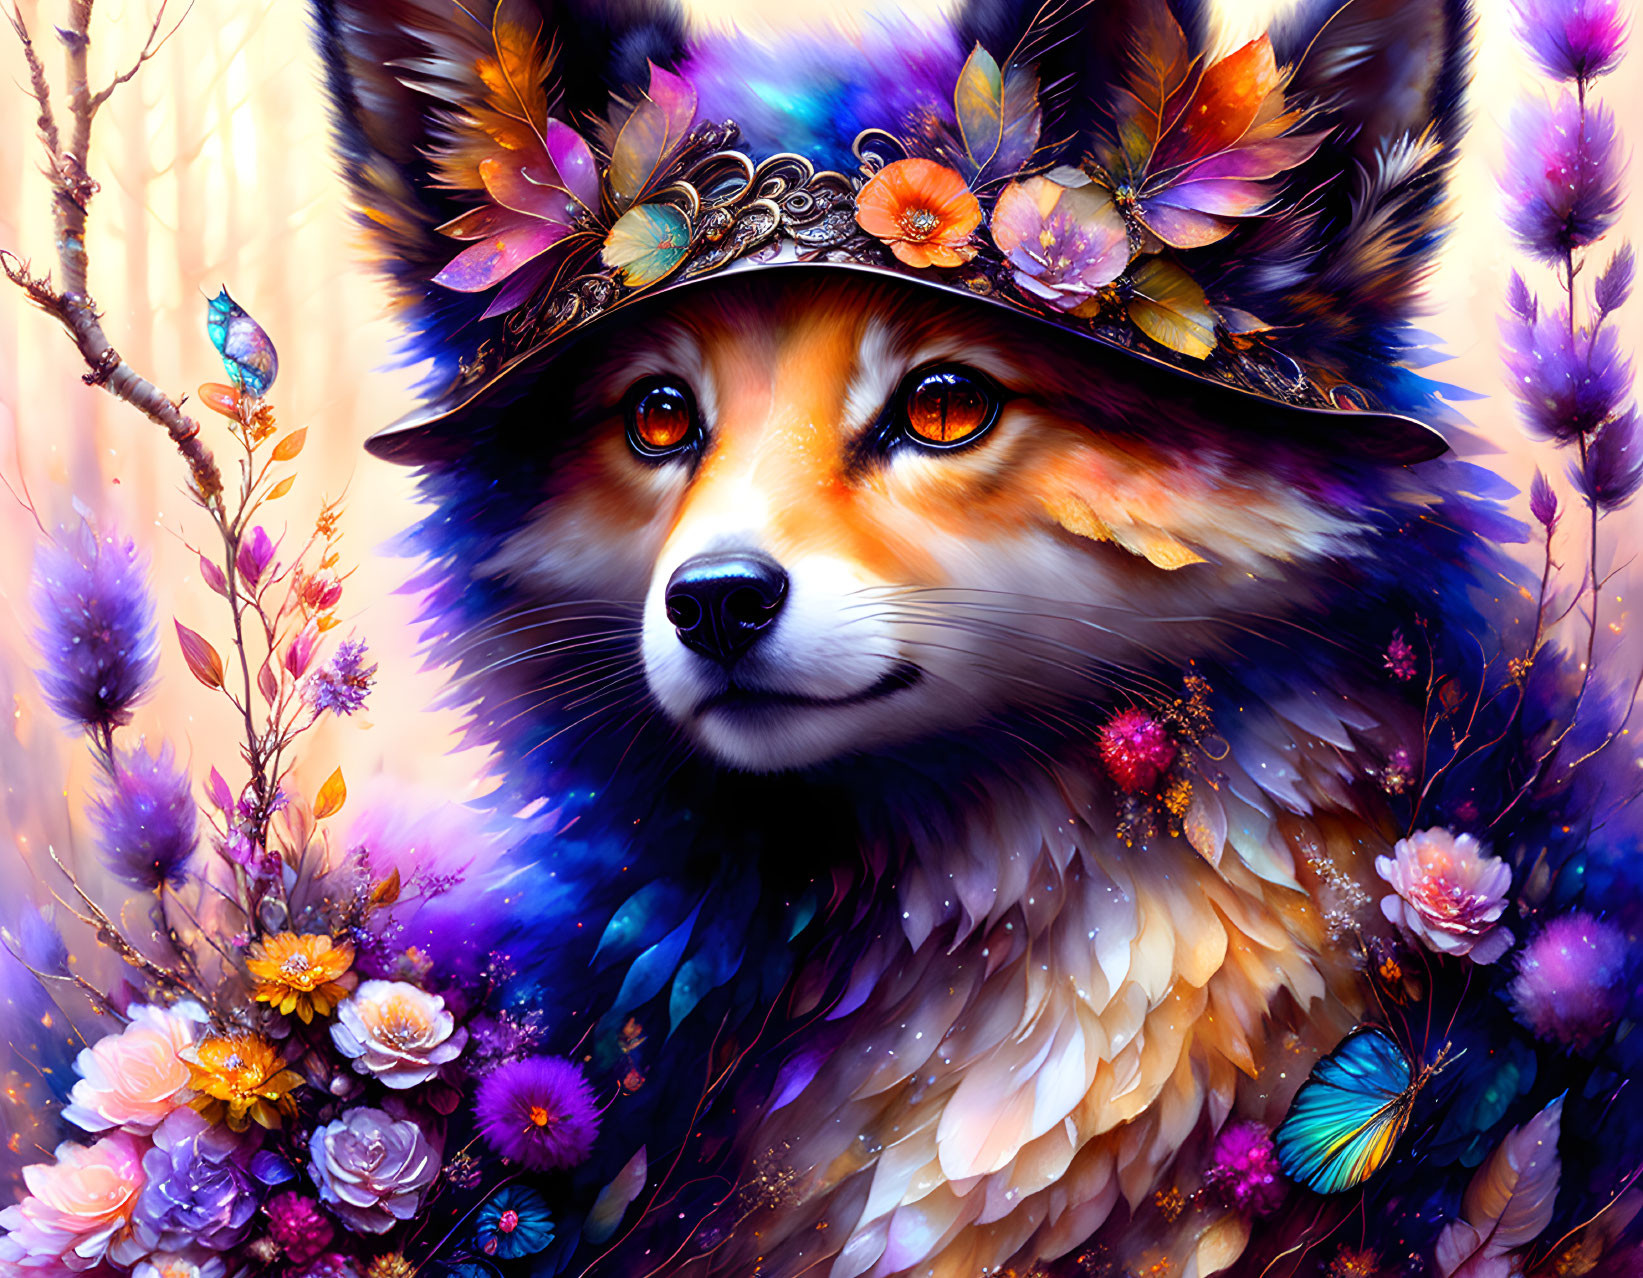 Colorful Fox Illustration with Floral Hat and Butterflies